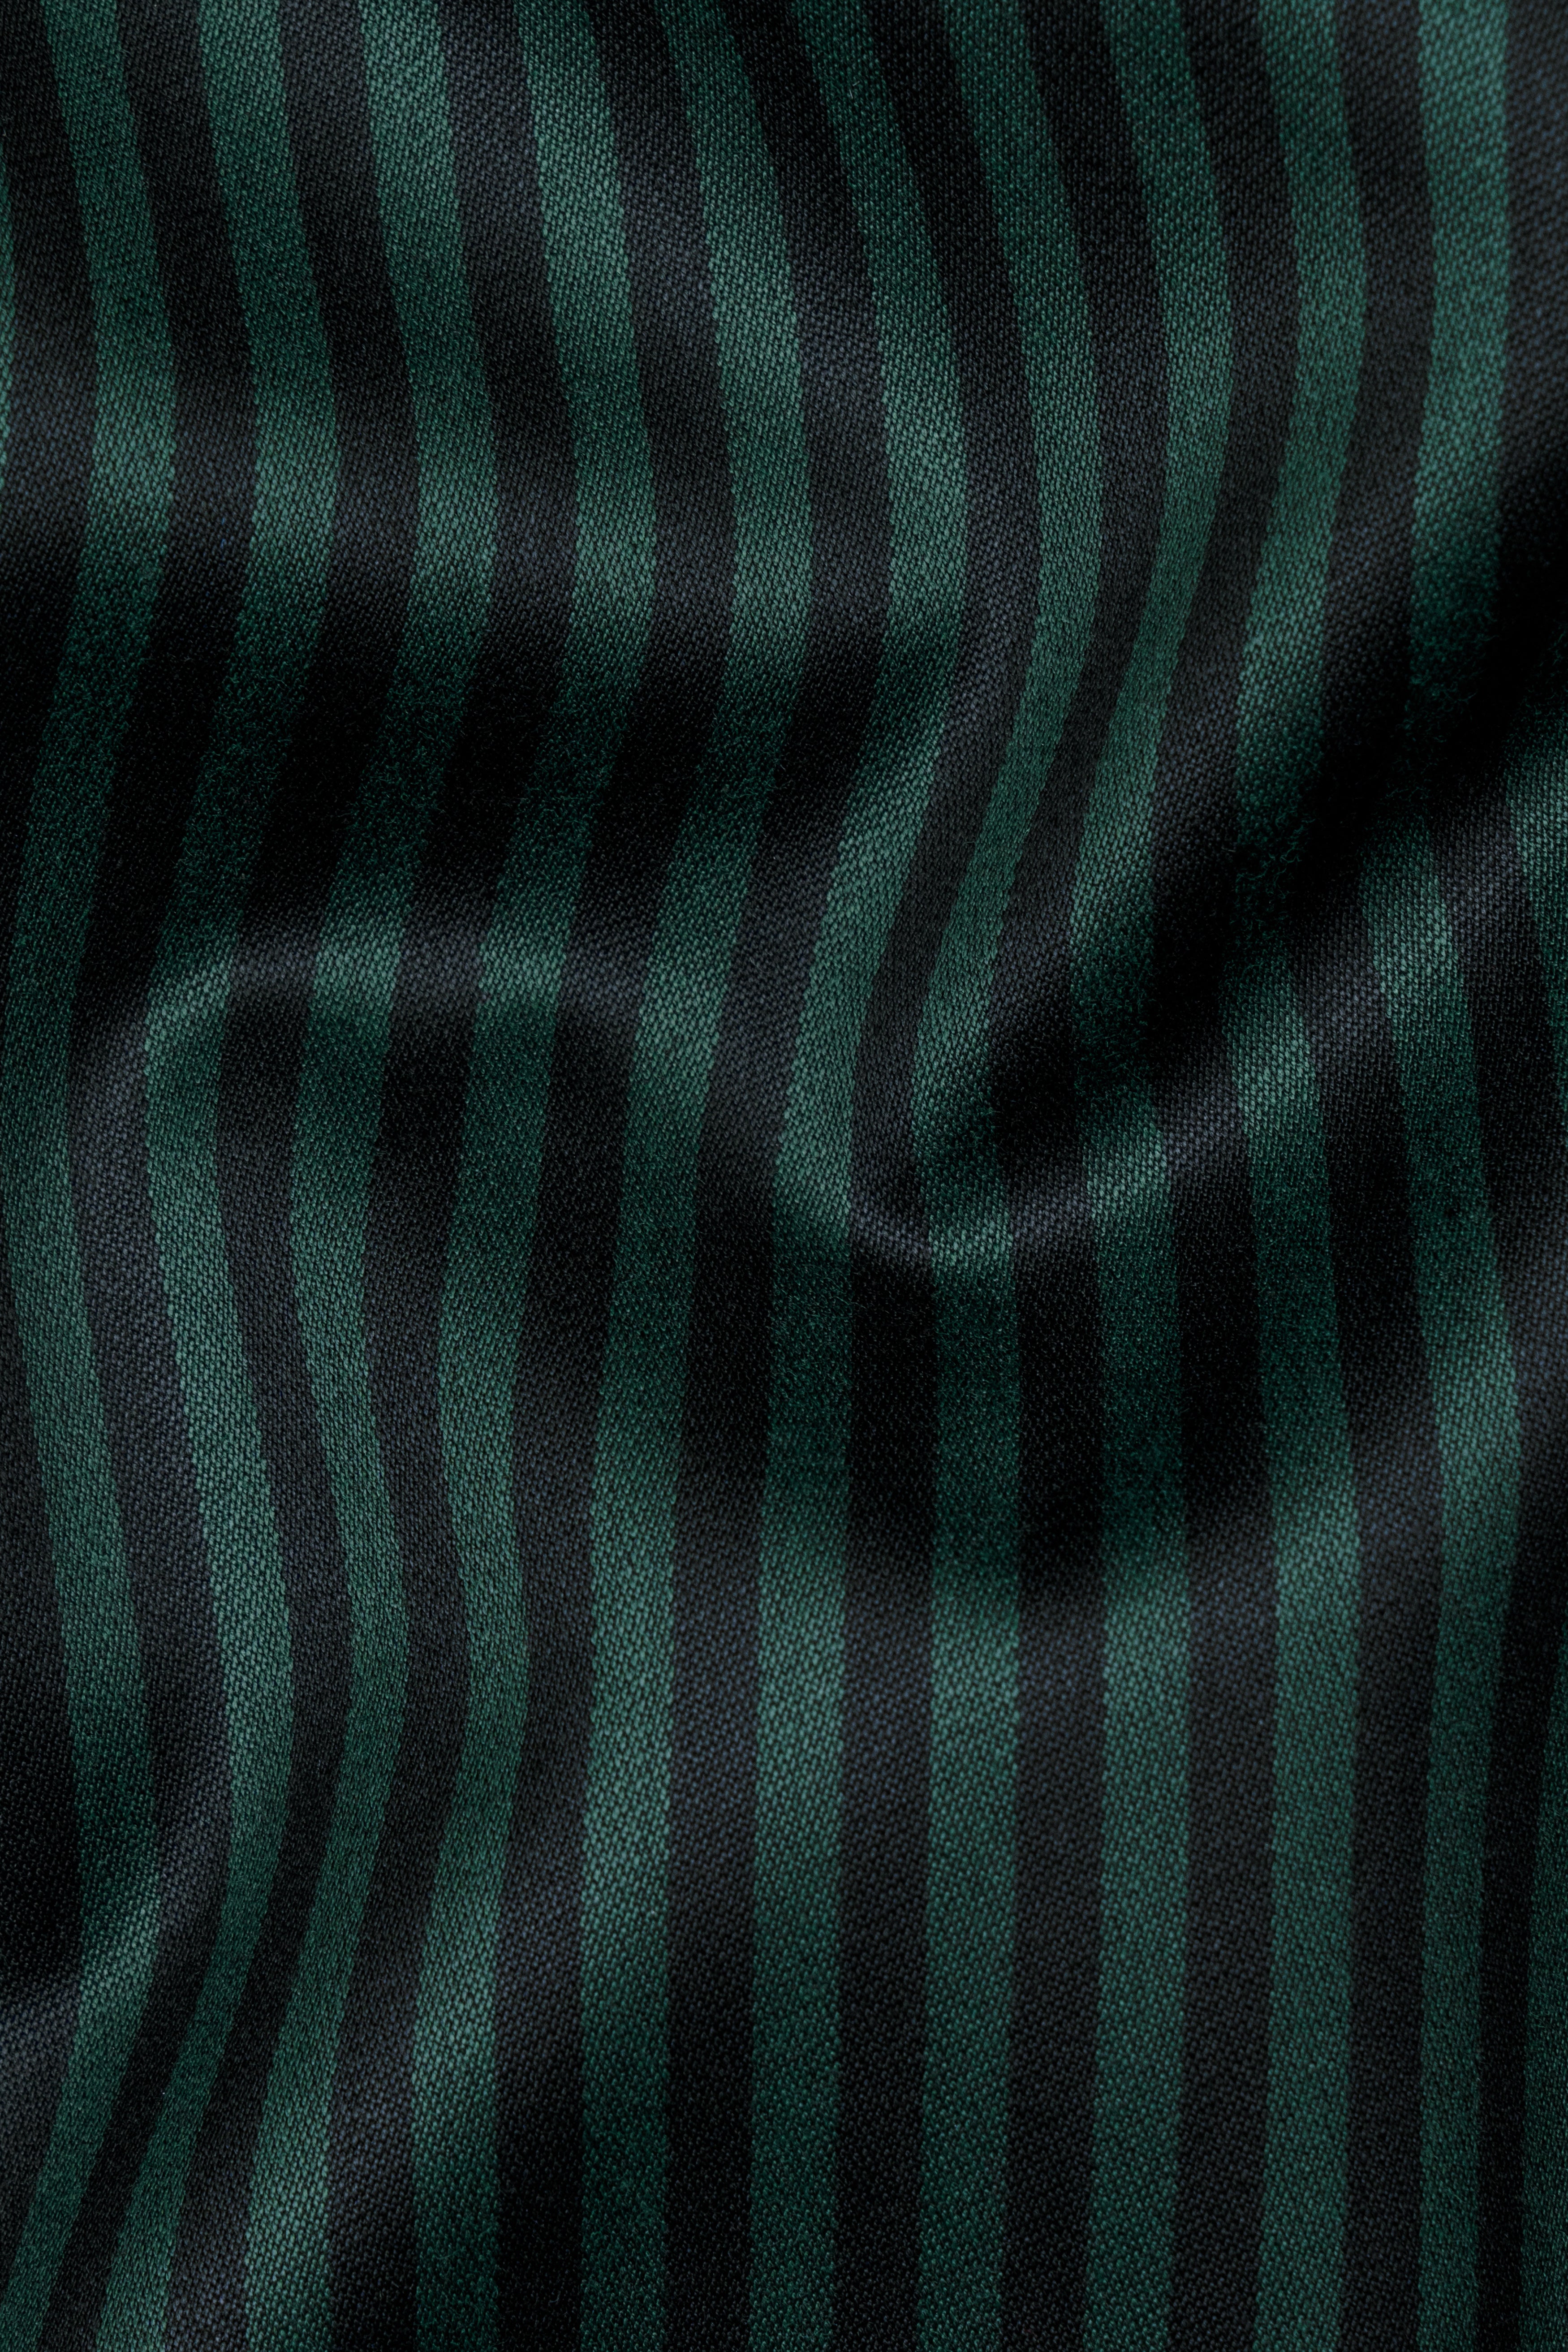 Celtic Green with Black Striped Wool Rich Cross Placket Bandhgala Suit